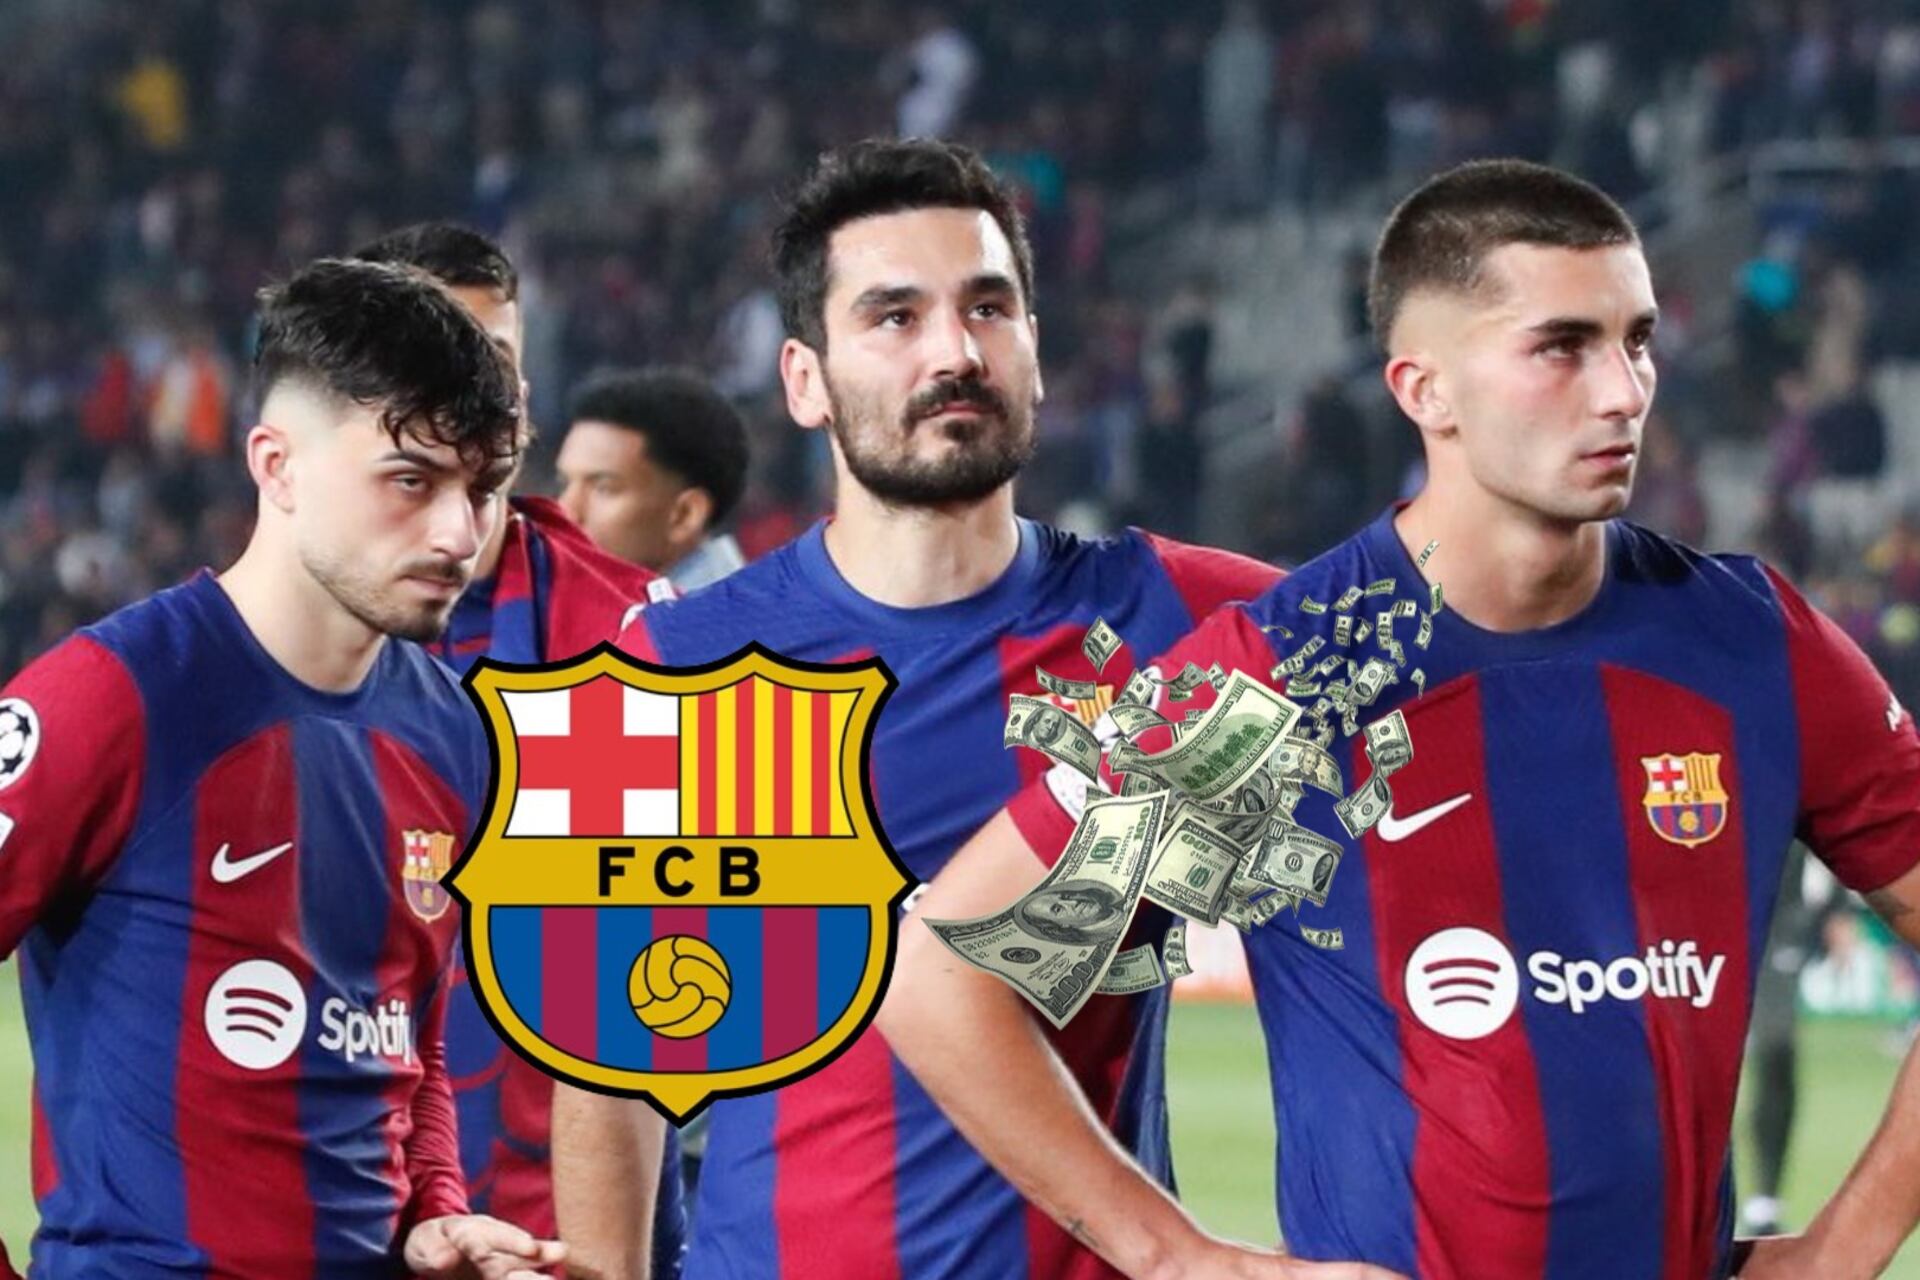 The first FC Barcelona player to be sacrificed after the defeat with PSG, the player they will sell for $74M